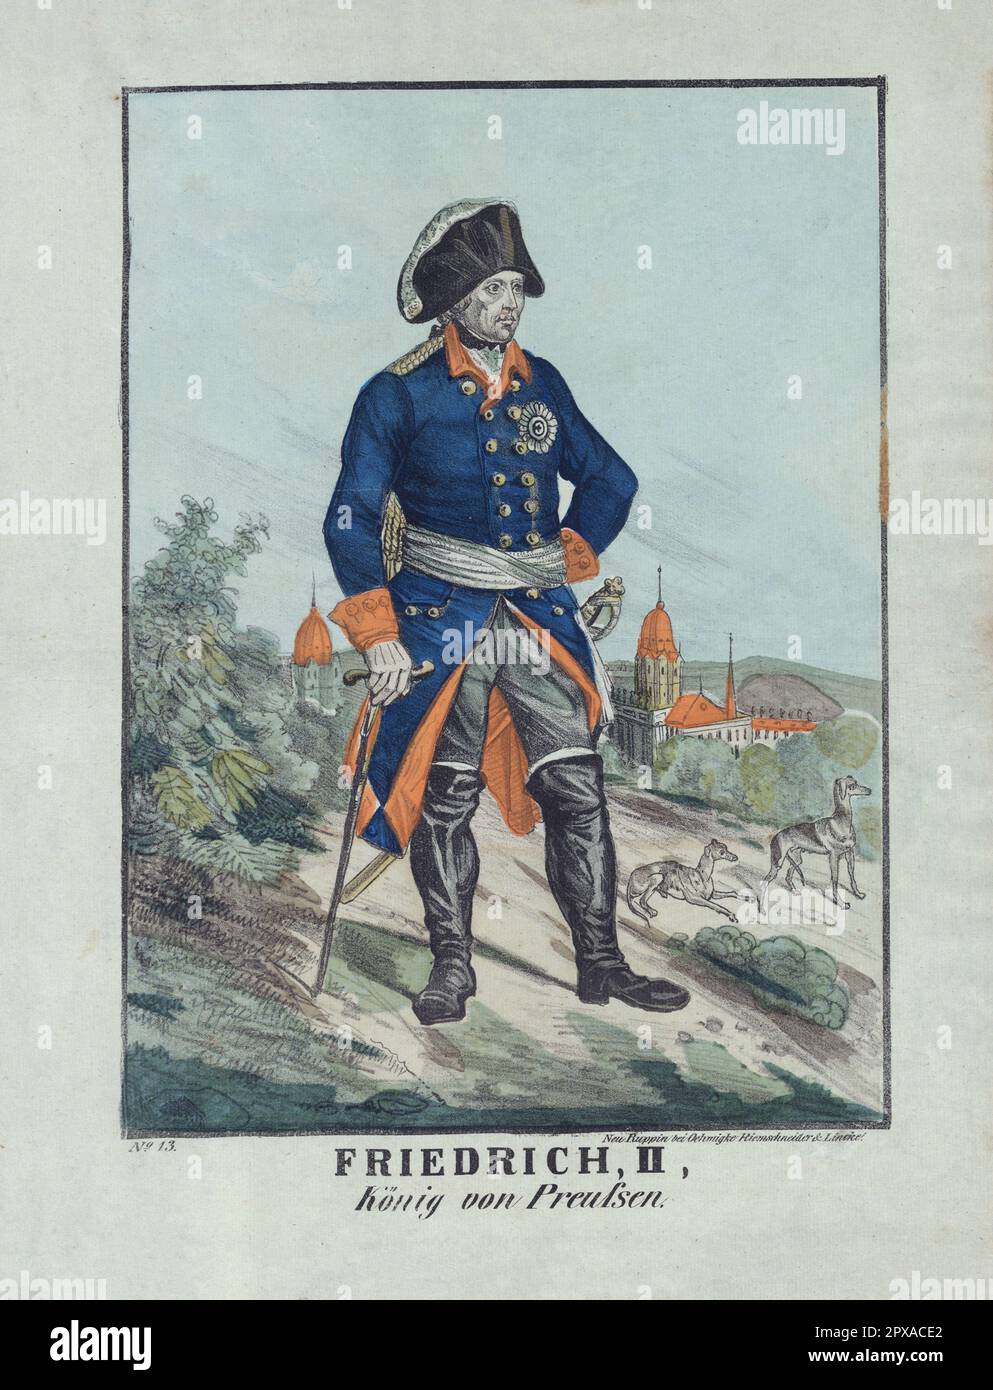 Vintage color lithograph of Frederick the Great. 1835 Frederick II (Gern.: Friedrich II; 1712 – 1786) was King in Prussia from 1740 until 1772, and King of Prussia from 1772 until his death. His most significant accomplishments include his military successes in the Silesian wars, his re-organisation of the Prussian Army. Stock Photo